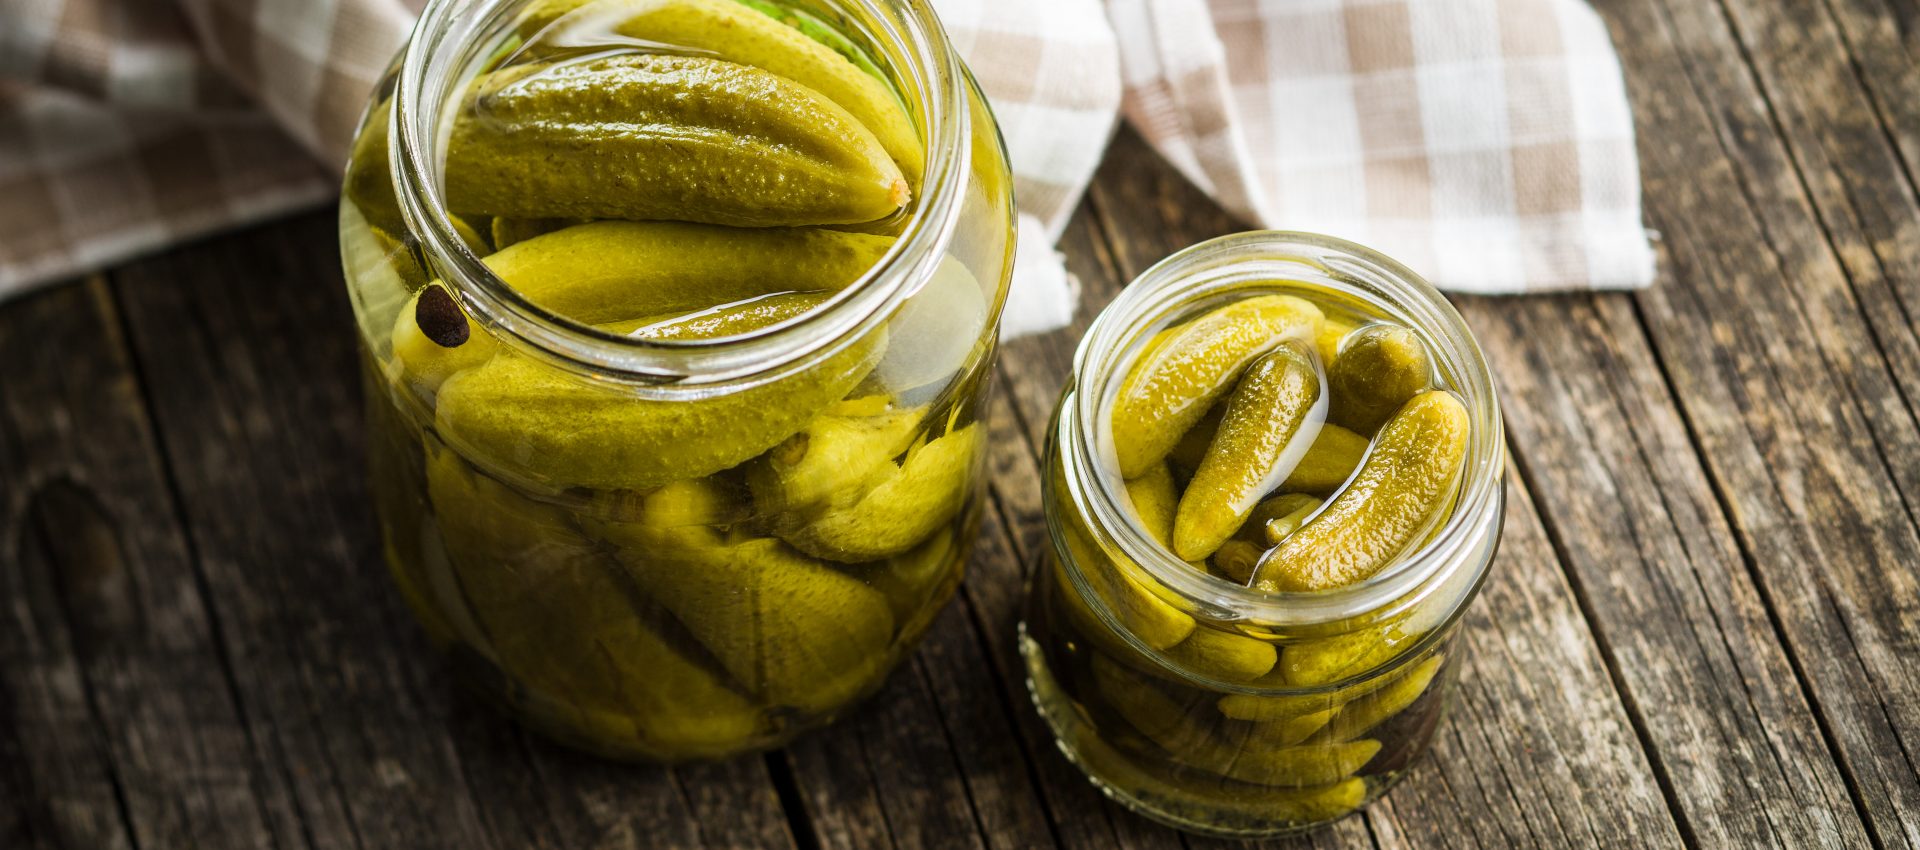 James Reinneck's White Ribbon Bread and Butter Pickles